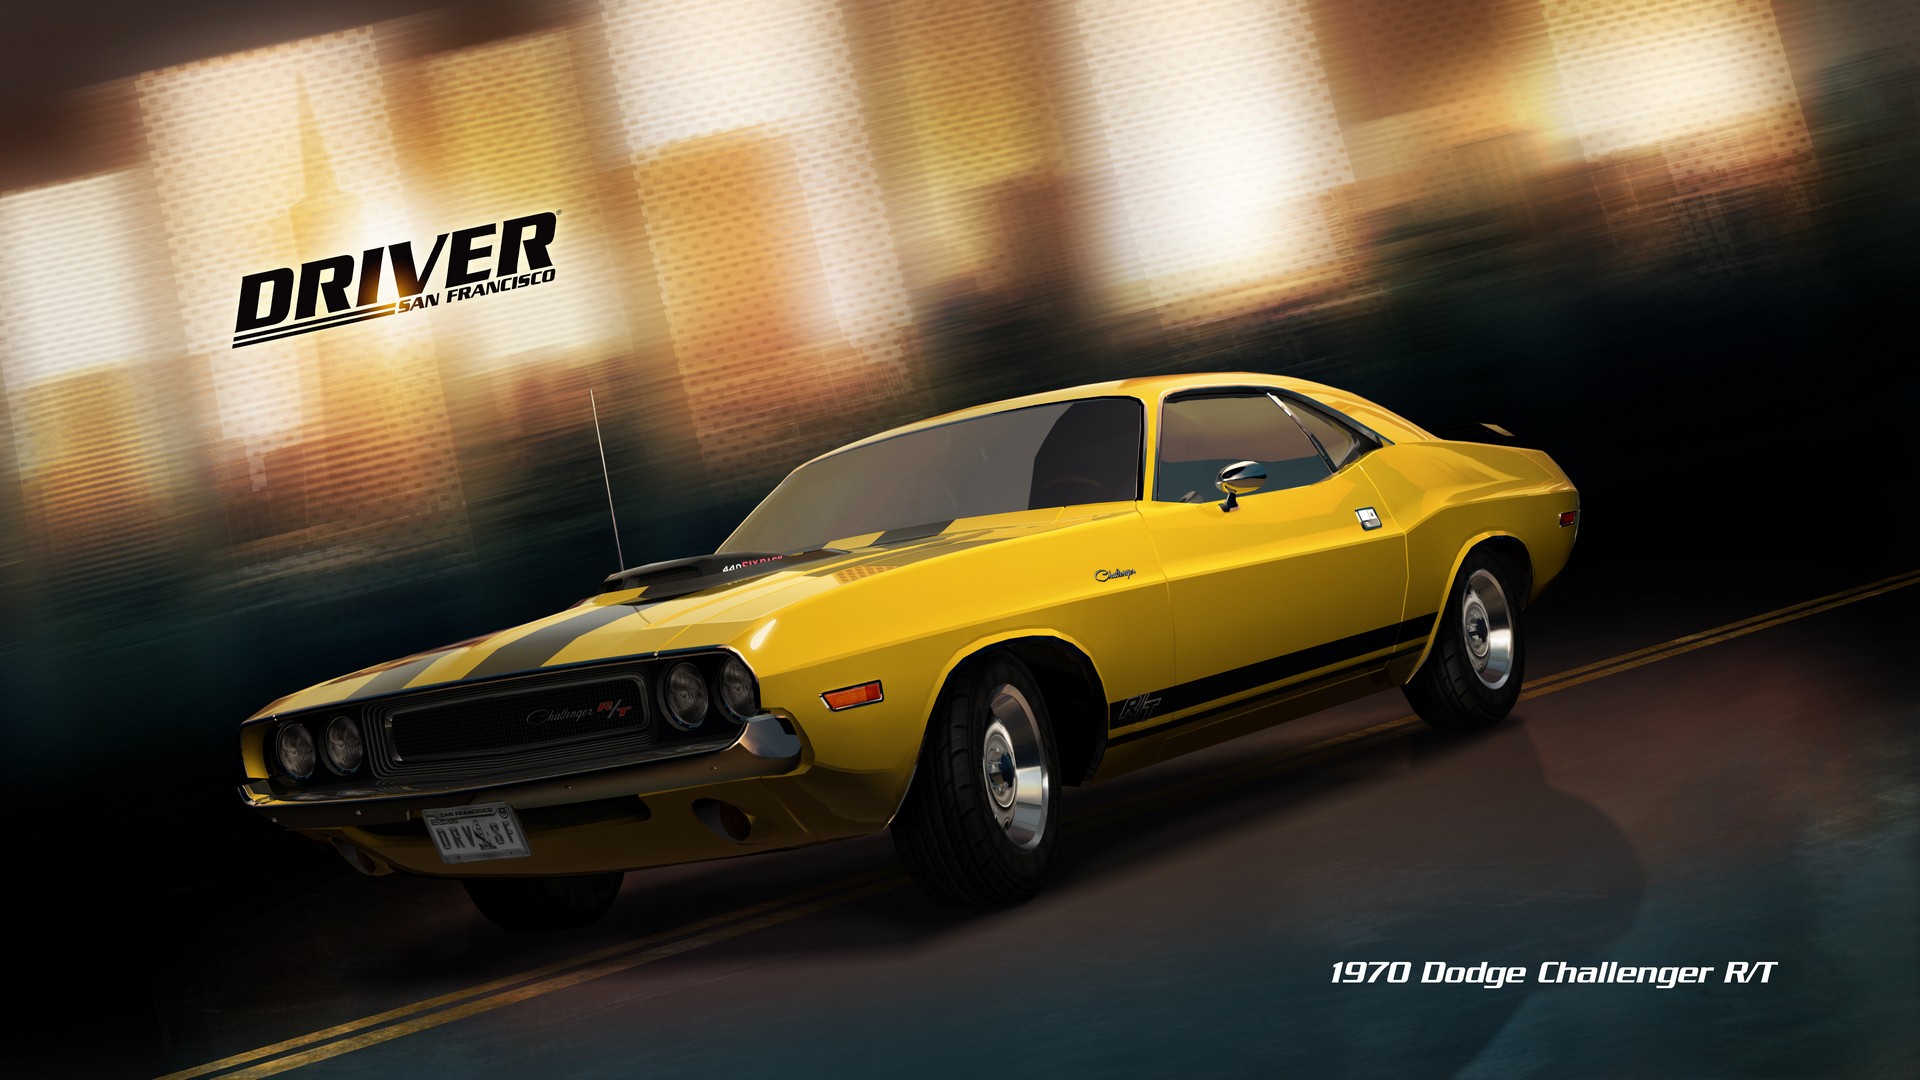 Video Games Driver San Francisco Dodge Challenger Driver Video Game Racing Stripes 1920x1080